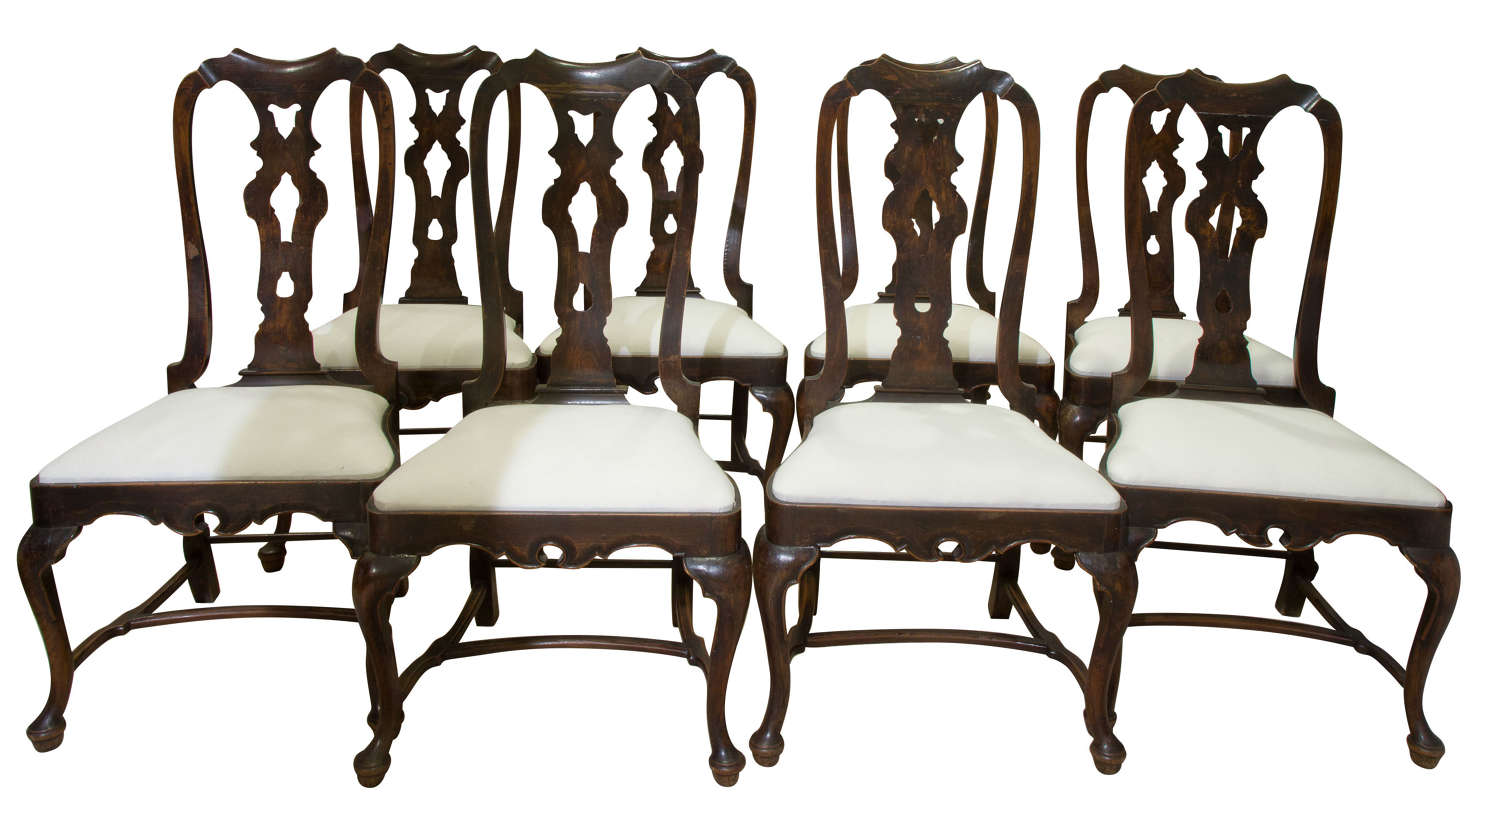 Set of 8 Queen Anne style dining chairs